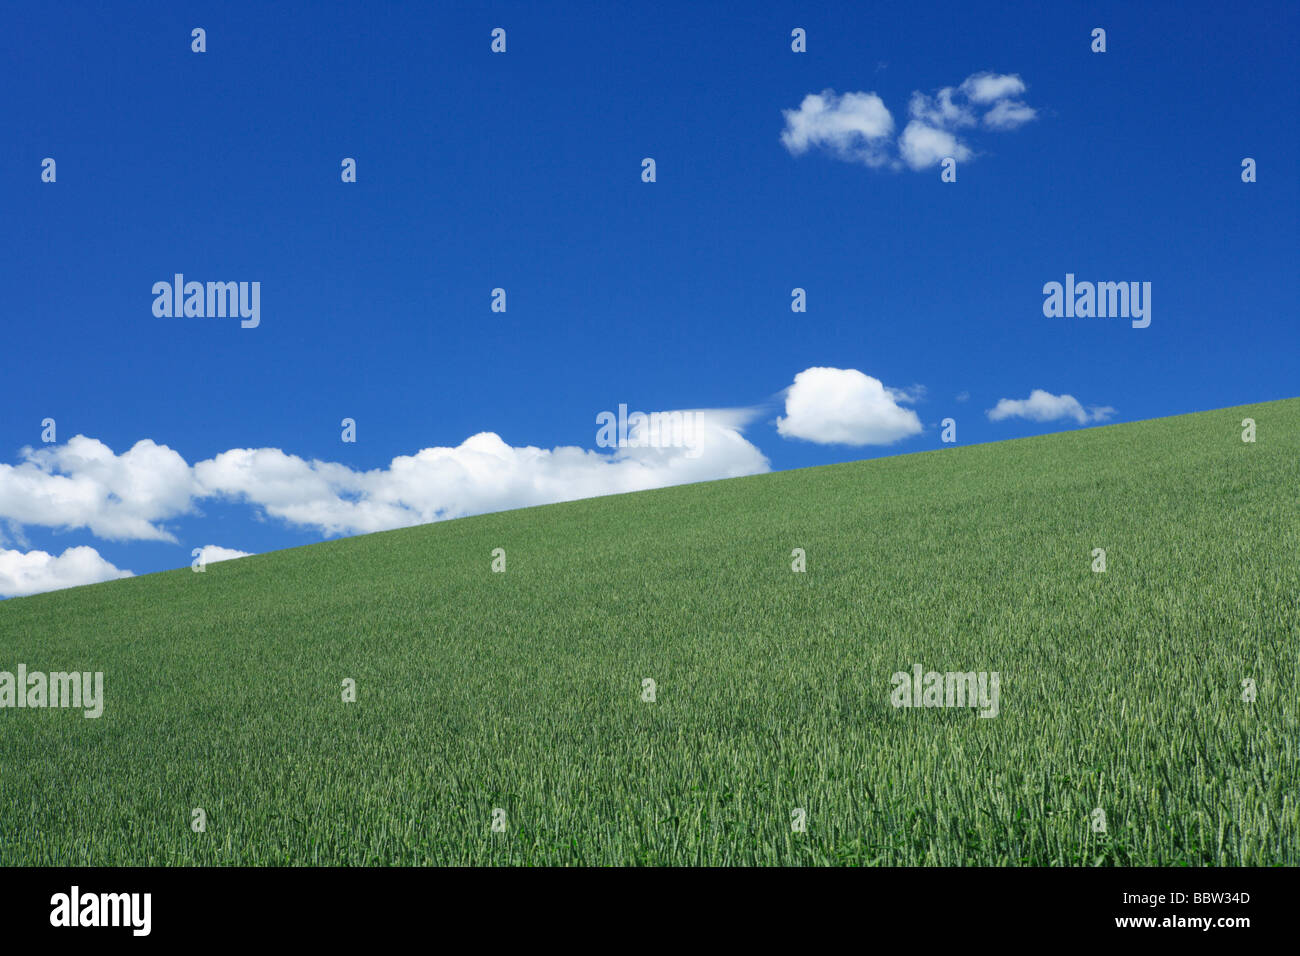 Plants growing in a field against blue sky Stock Photo